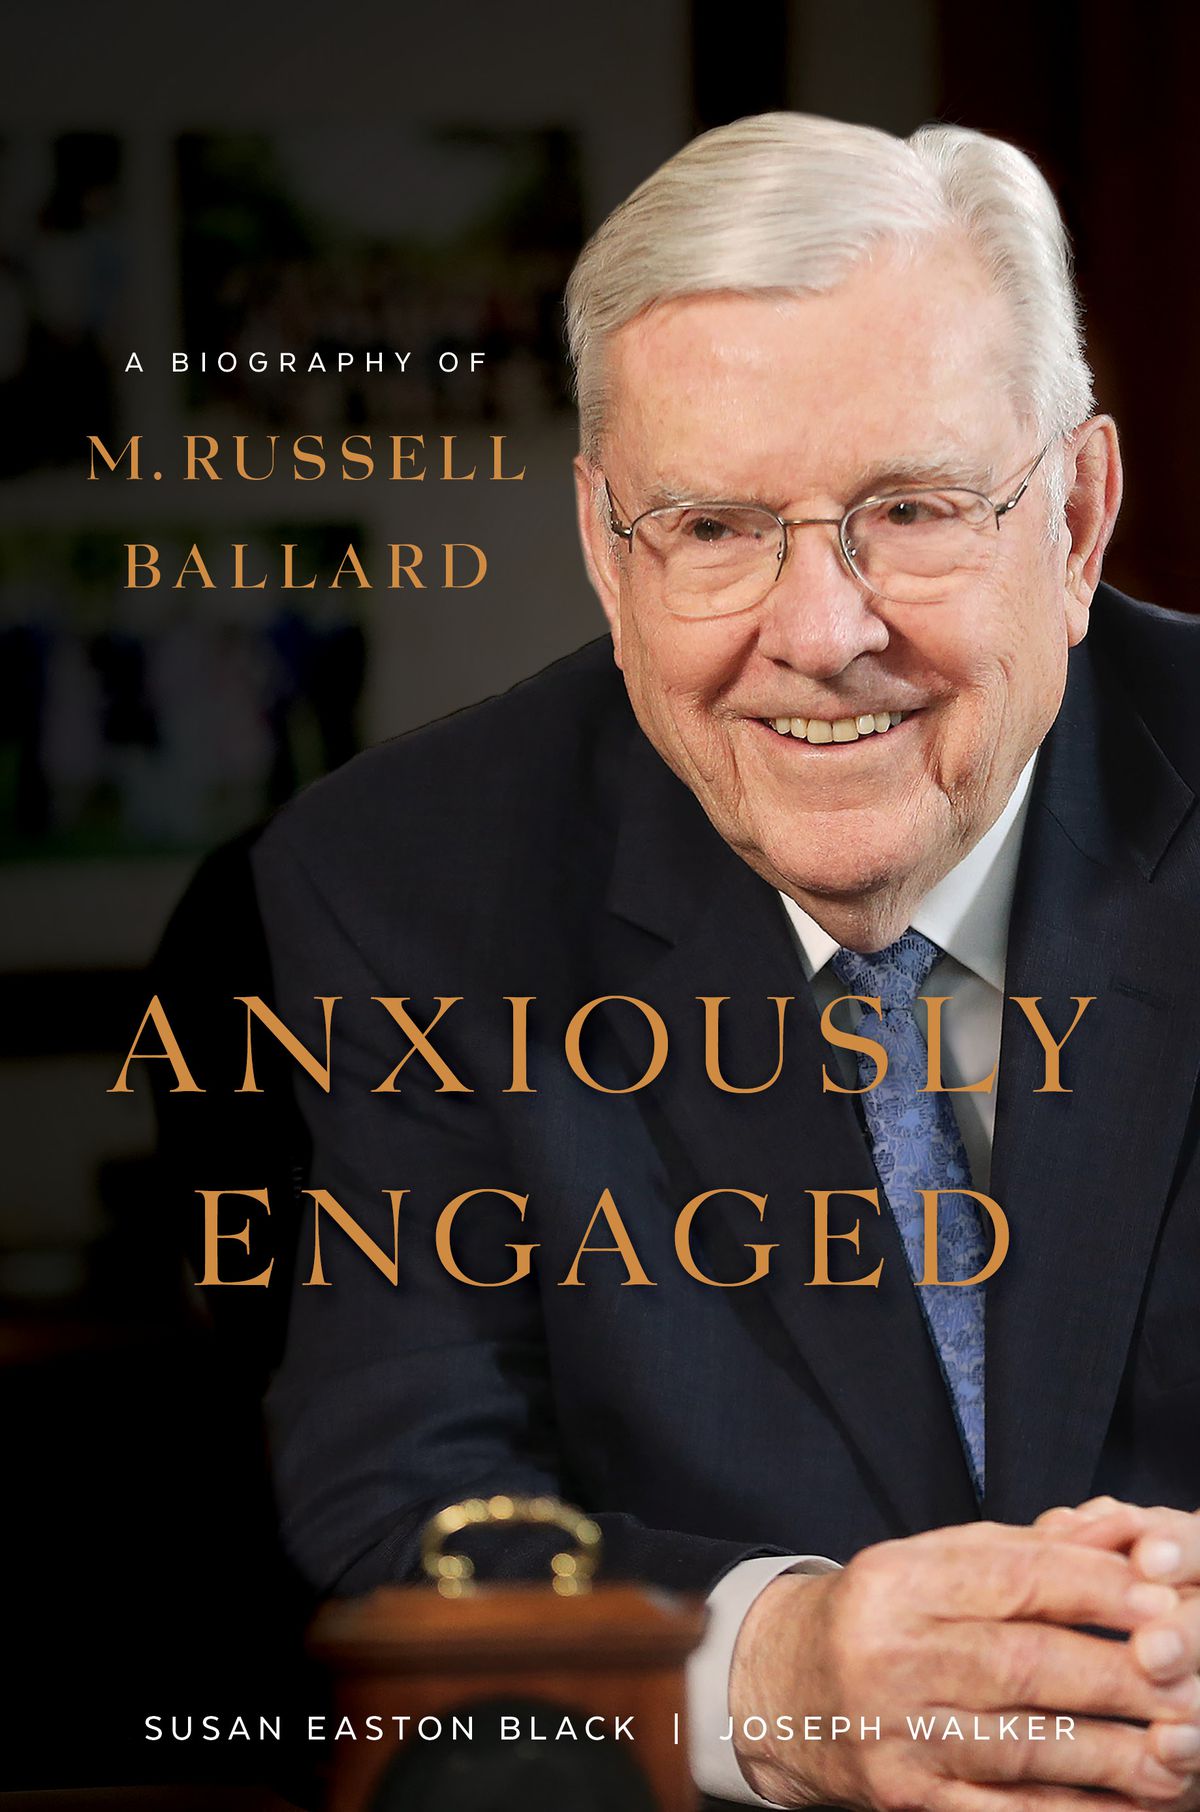 President M. Russell Ballard shares his life story in his new biography, “Anxiously Engaged.”